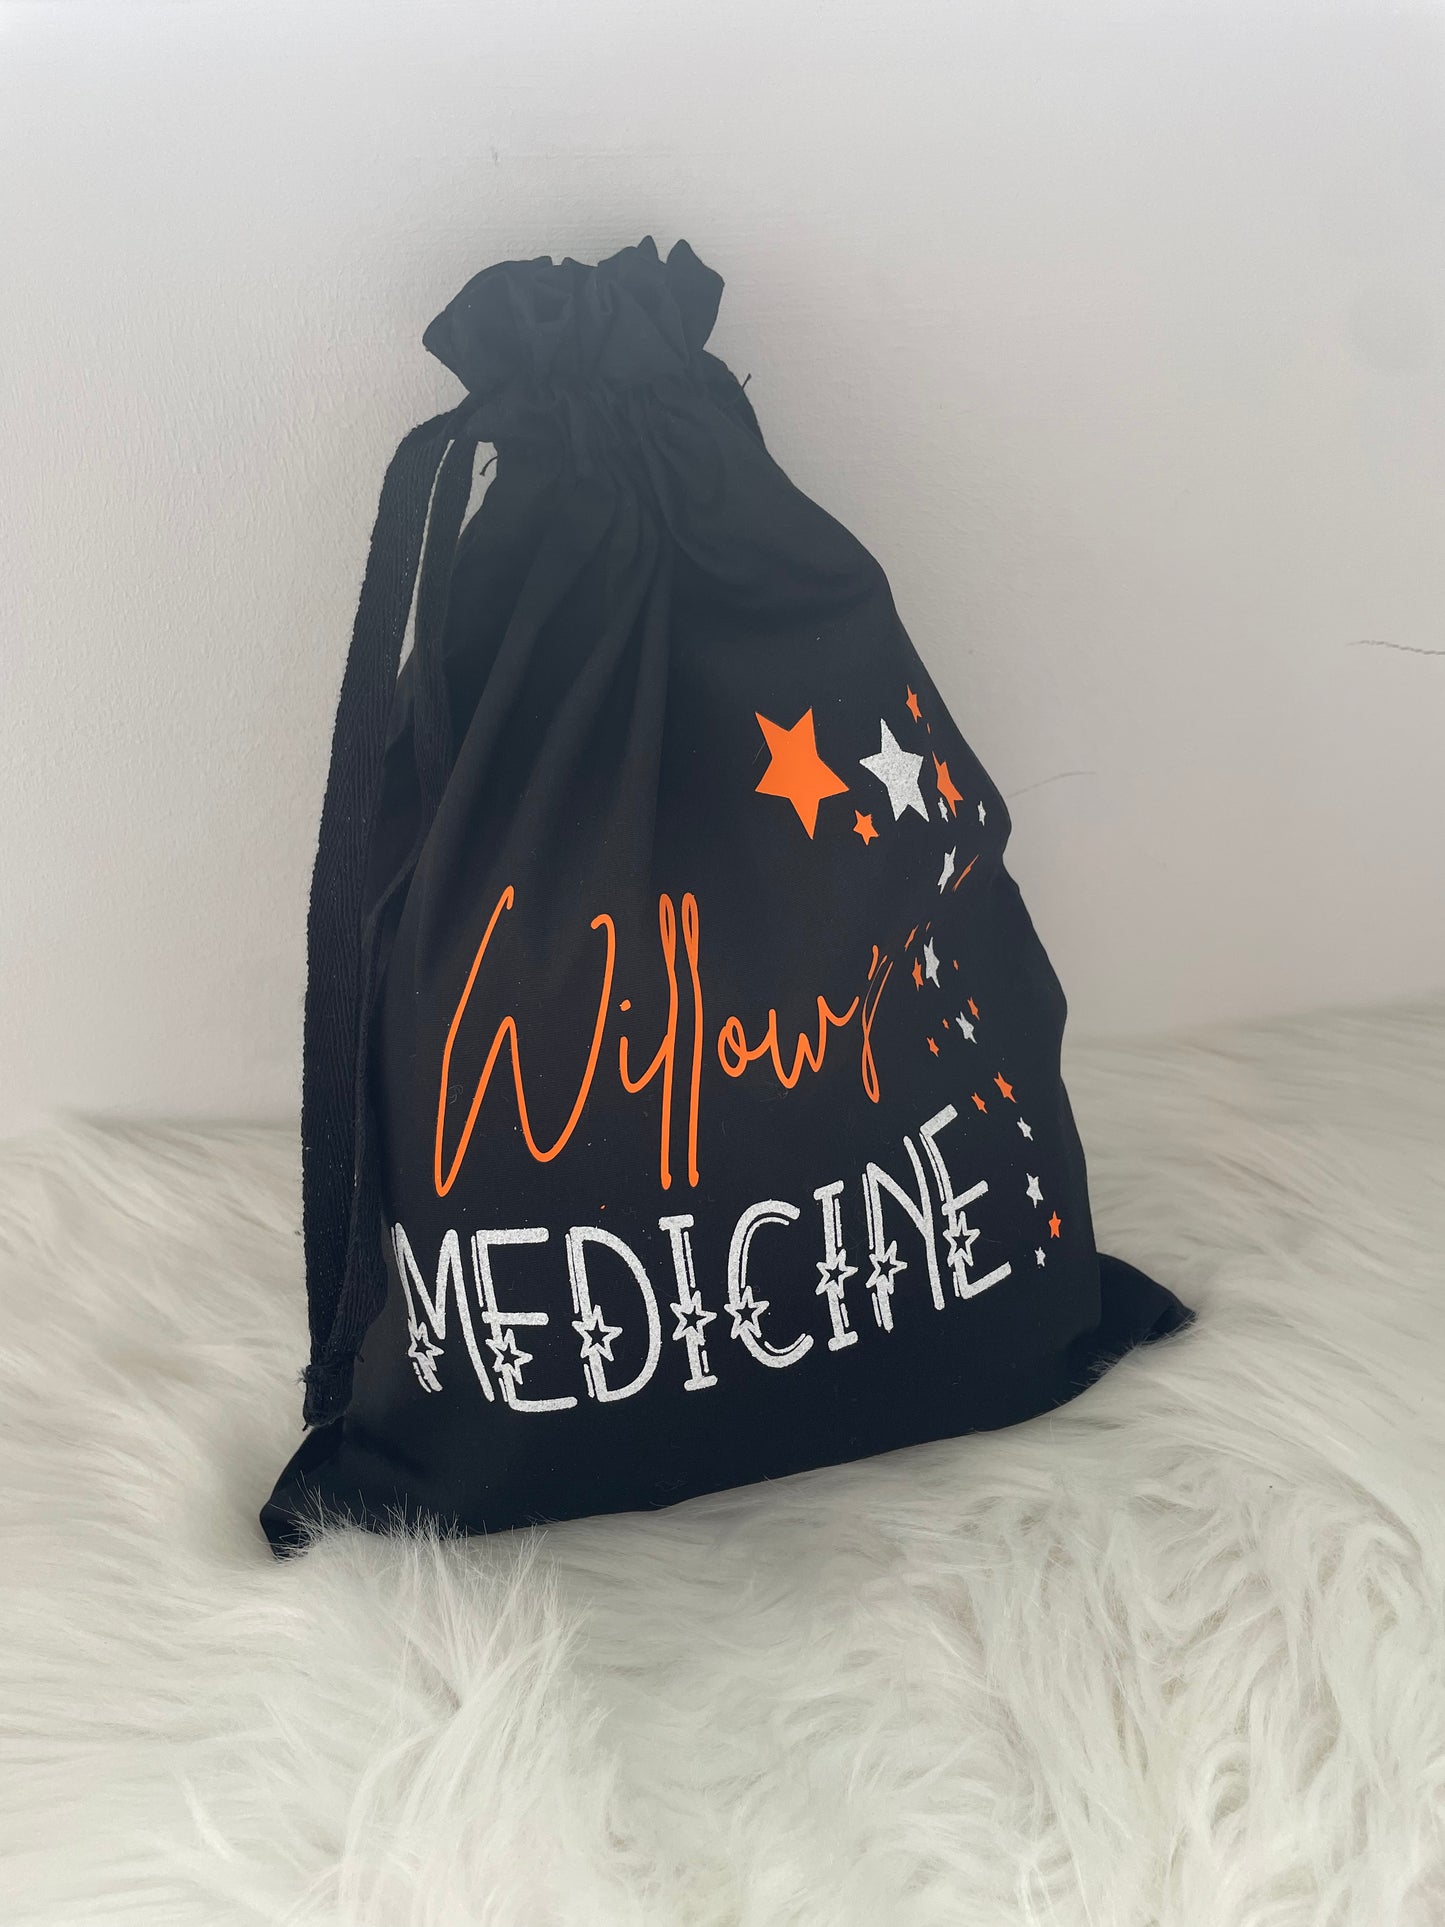 Personalised Medication Bag - The PERFECT medication holder when out and about!